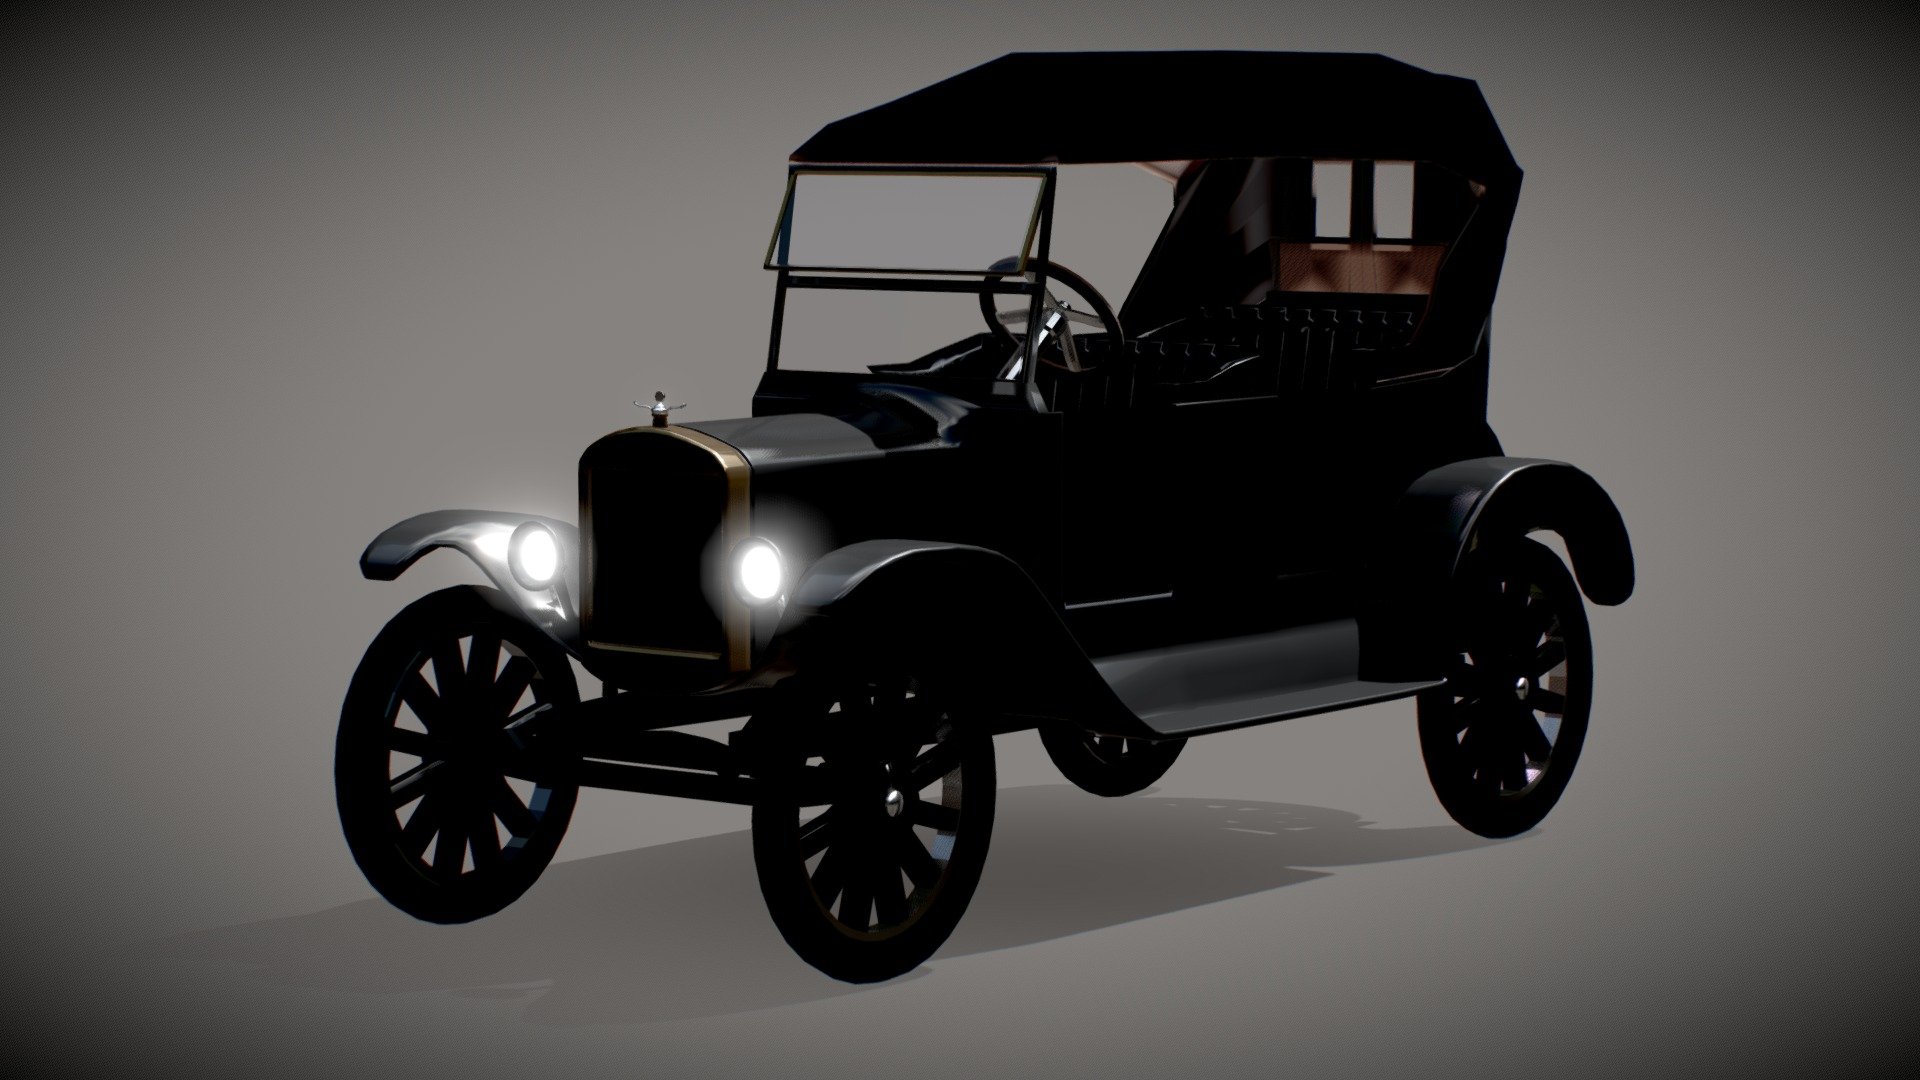 Ford Model T remake, now that i have more skills and knowledge in 3D modelling. The first ever 3D model i finished was a lower quality rendition of a Model T. I tried to keep the quality low enough to be used in video games 3d model